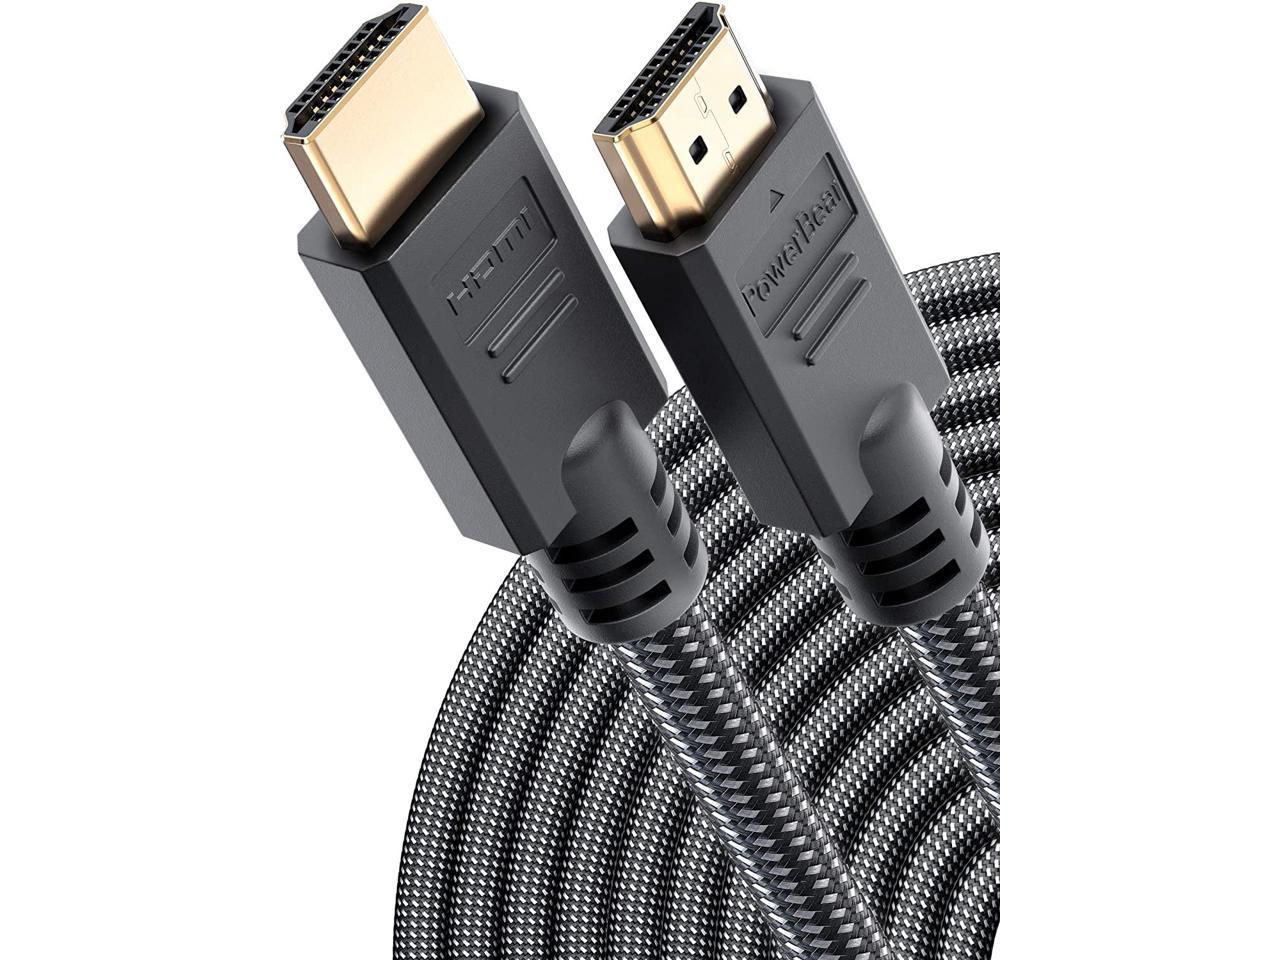 Gold Connectors & Premium Braided Nylon 1 Pack PowerBear 4K HDMI Cable 25 ft